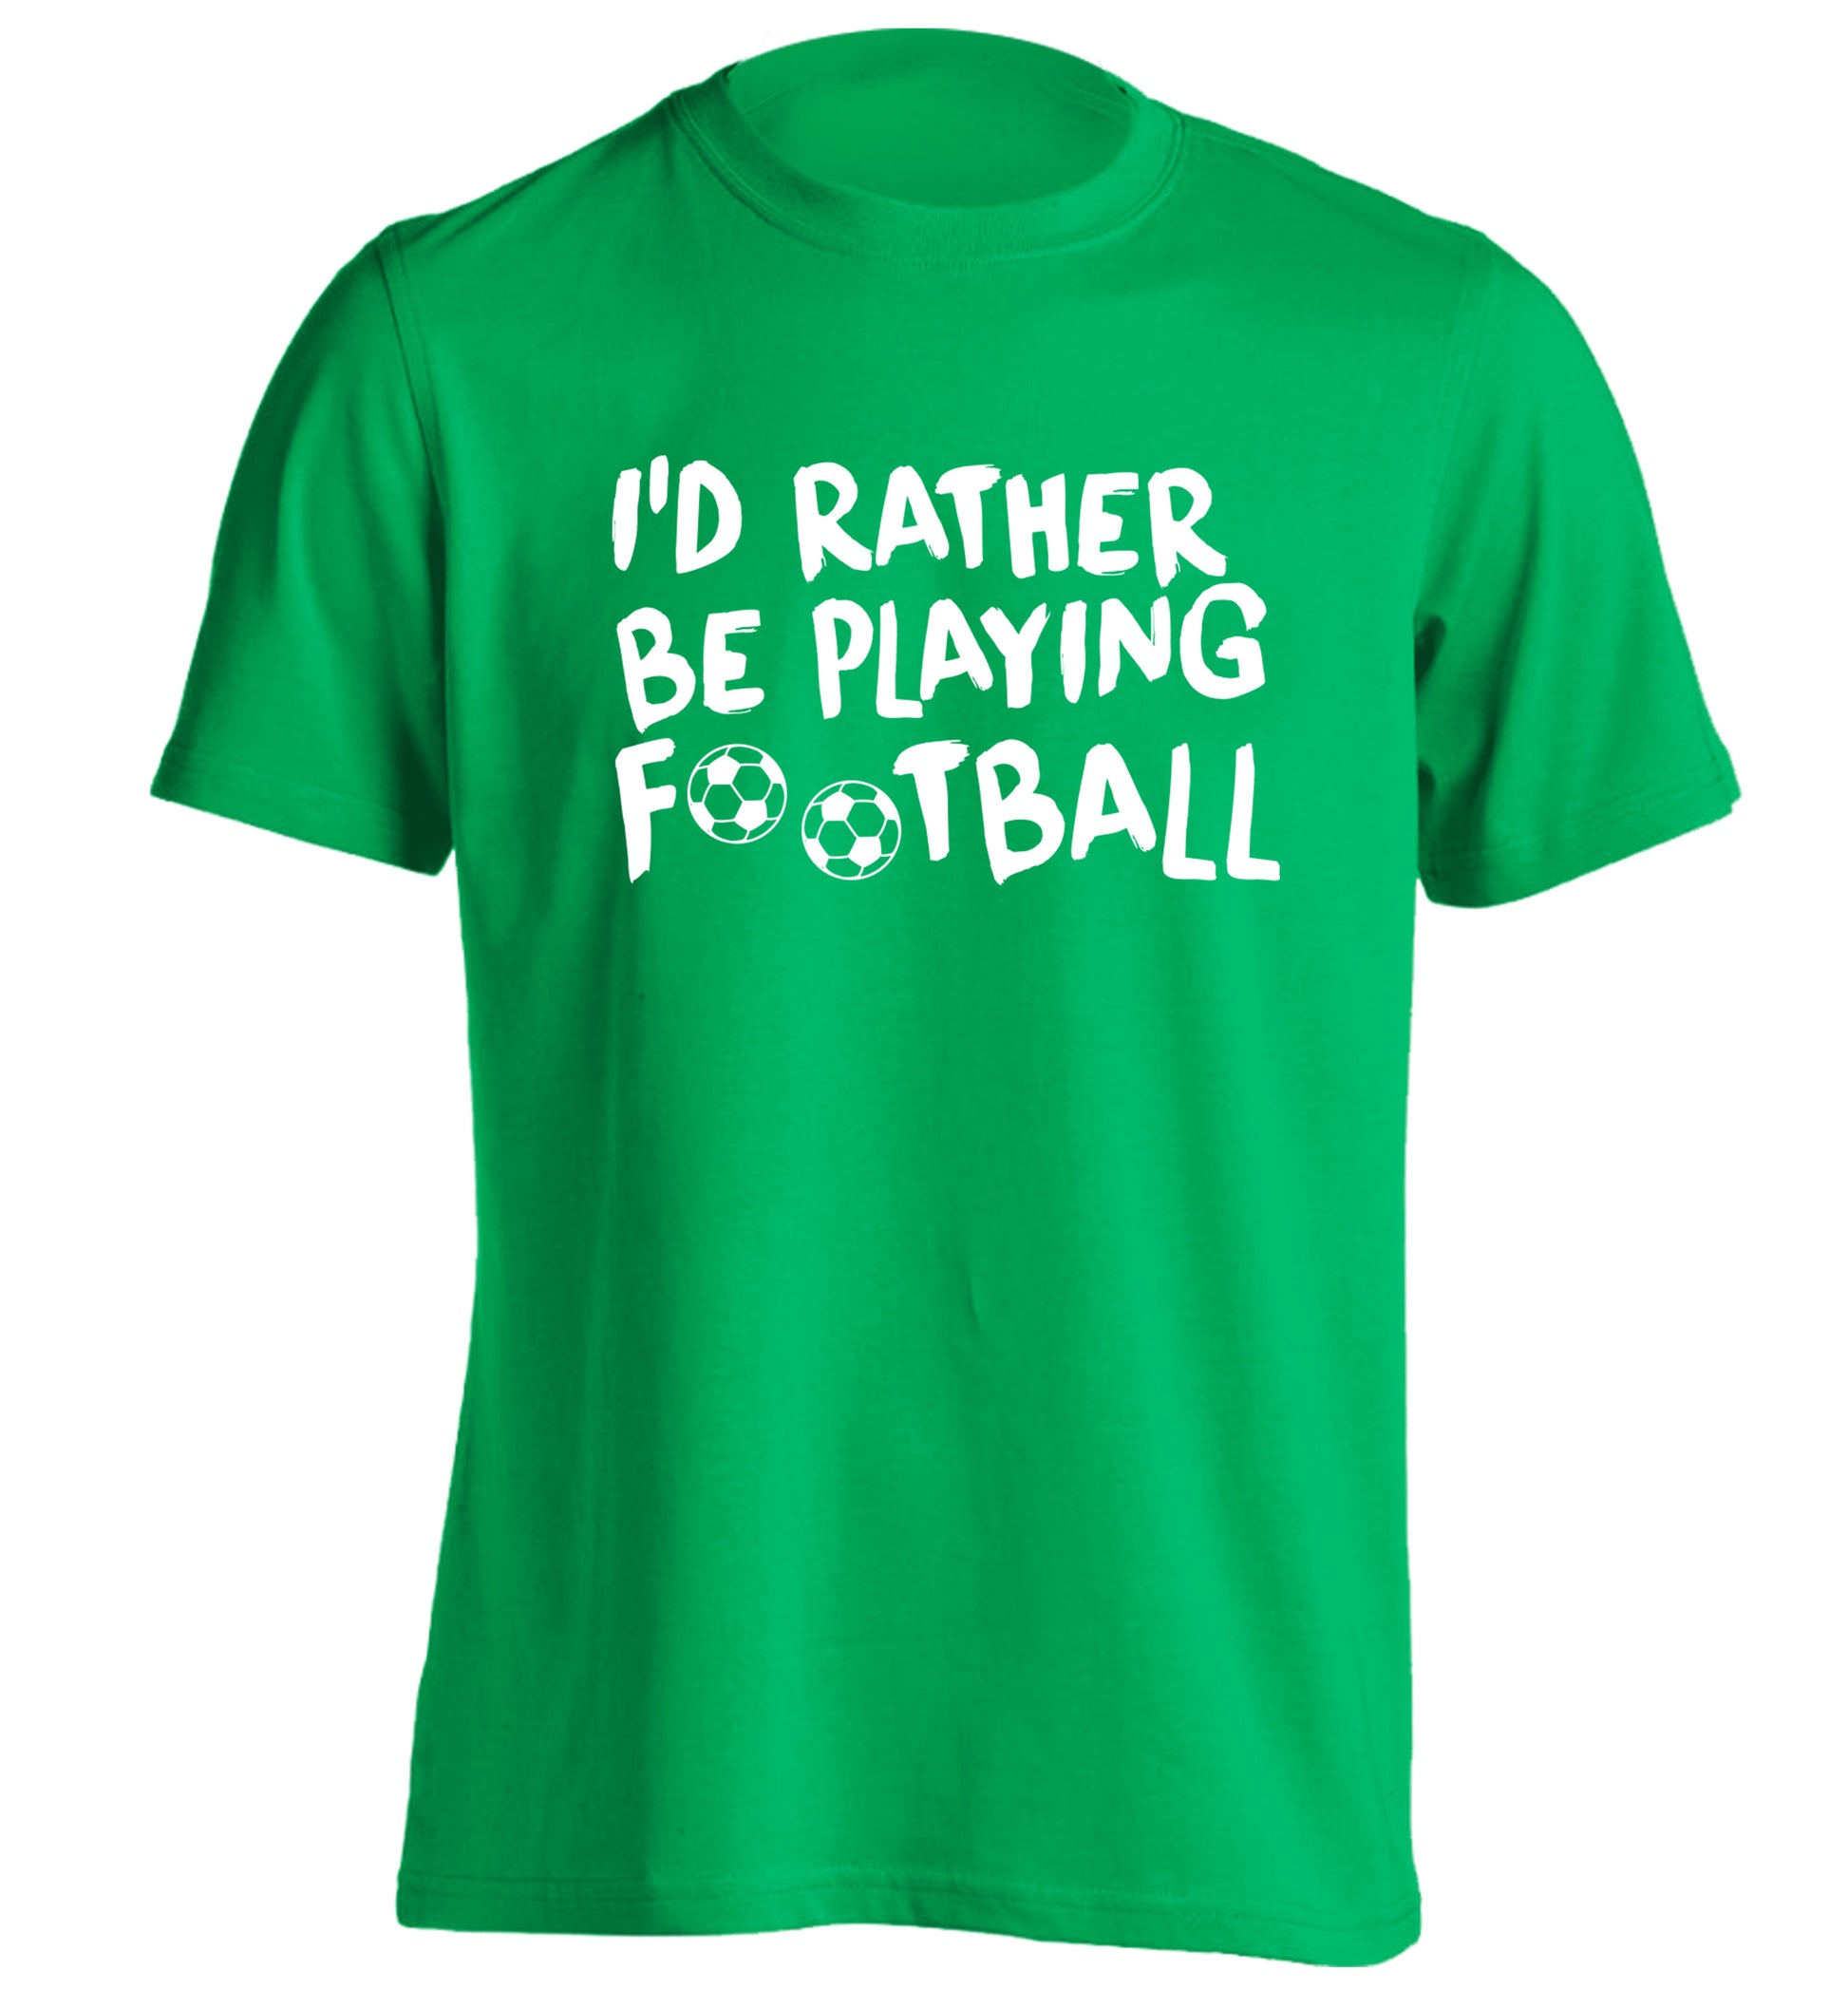 I'd rather be playing football adults unisexgreen Tshirt 2XL